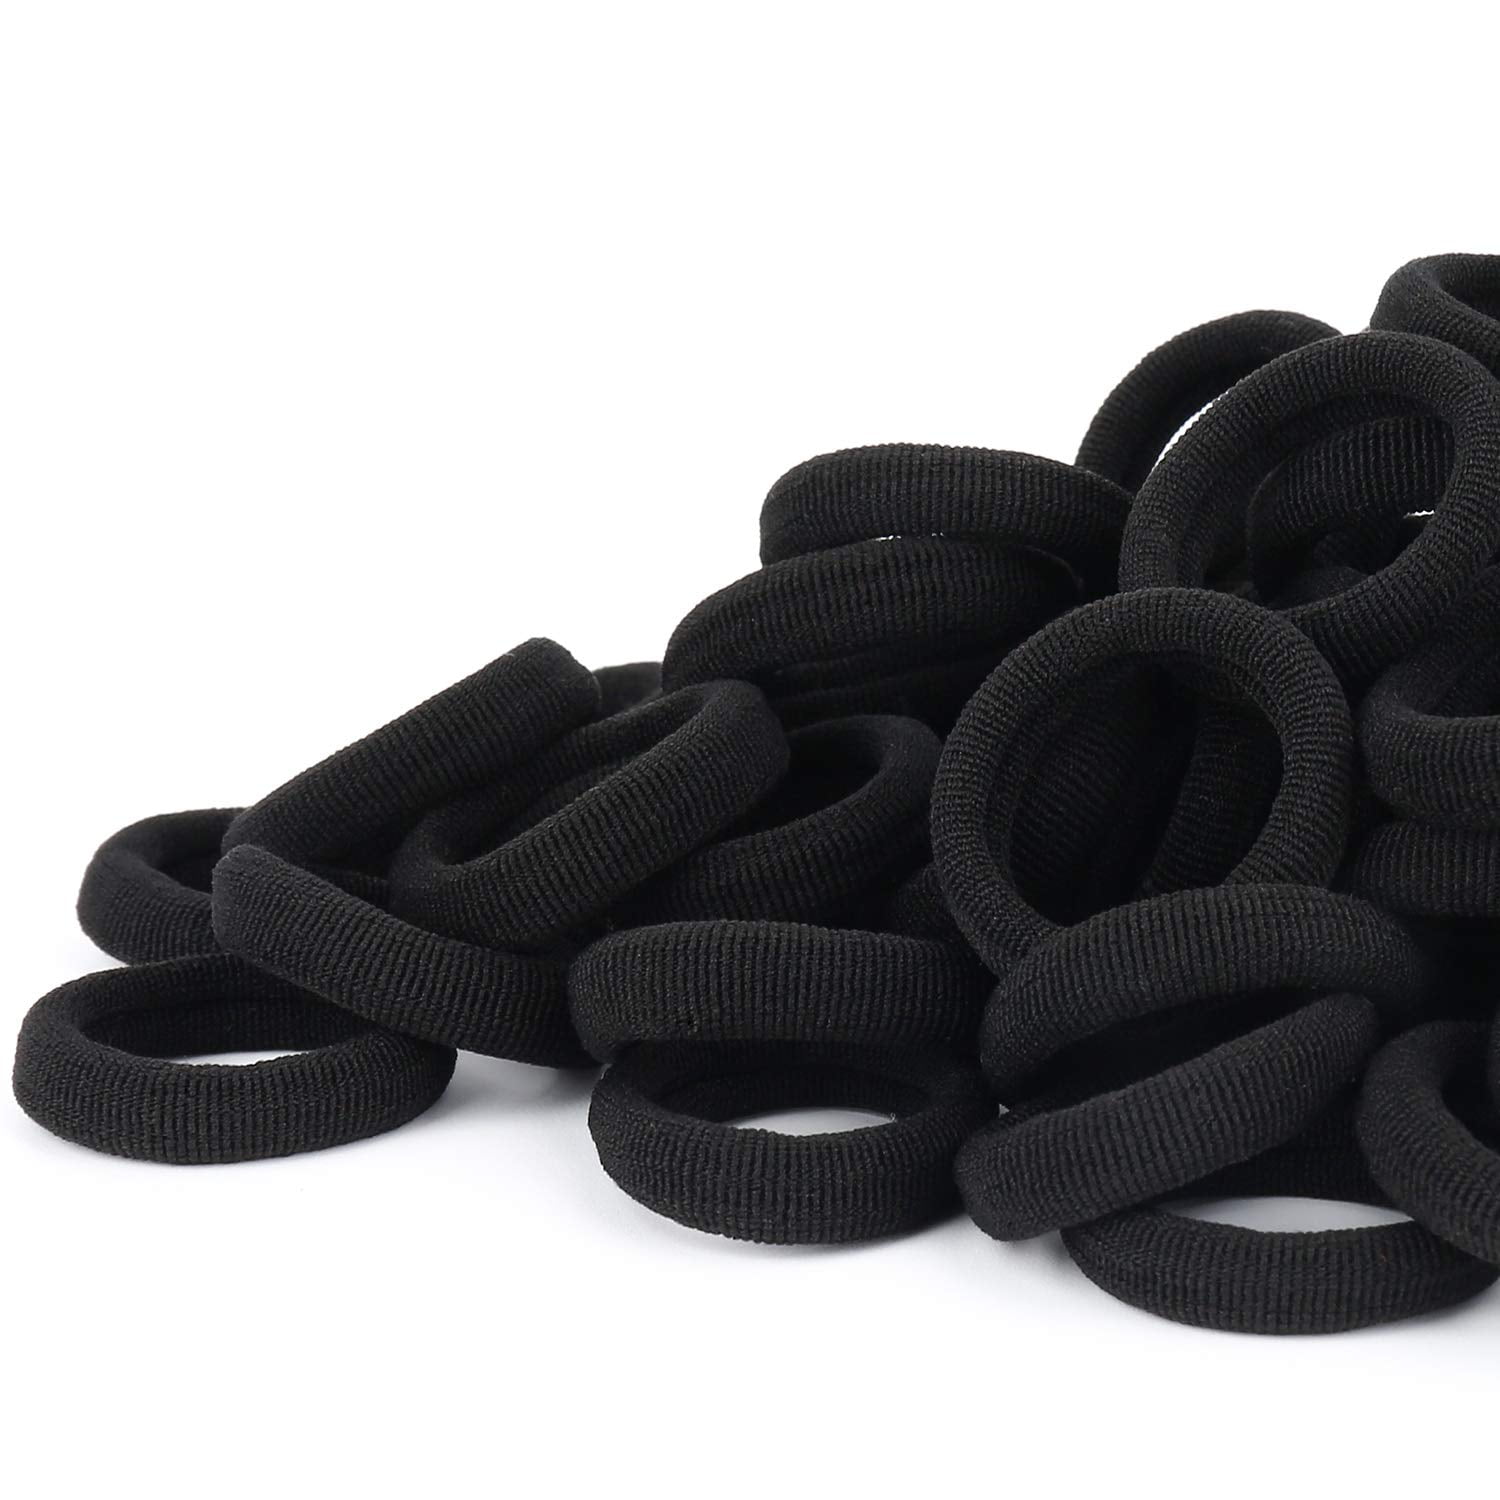 Dreamlover Elastic Hair Ties, Small Tiny Hair Elastics for Baby Girls,  Toddler Hair Elastic Bands, Black Rubber Bands for Hair, 1500 Pieces